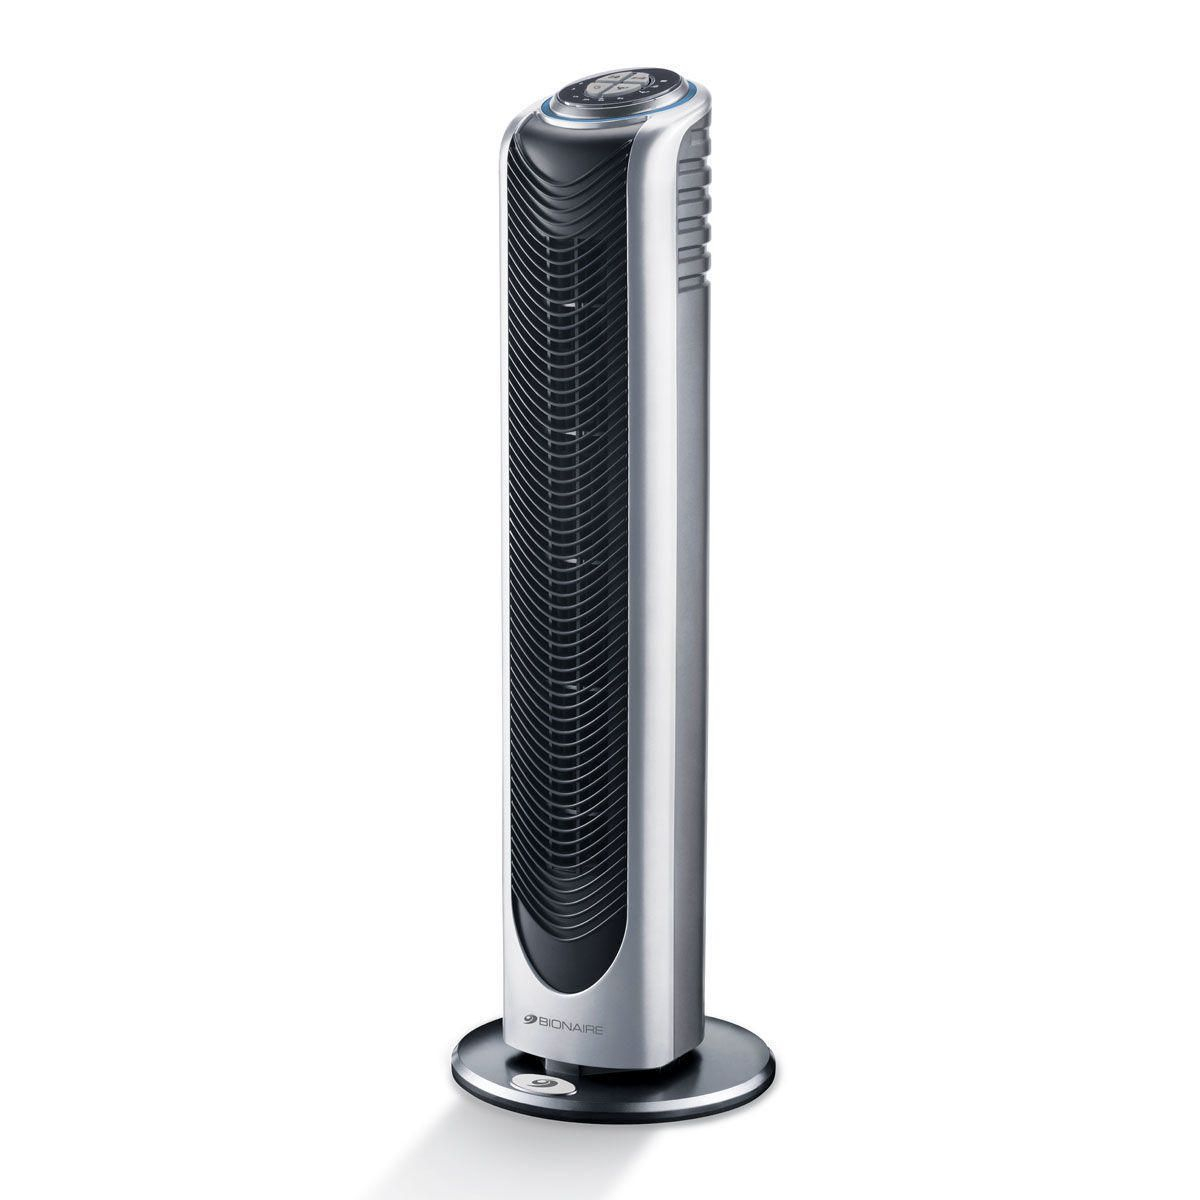 Bionaire 30 Inch Digital Tower Fan With Remote within size 1200 X 1200